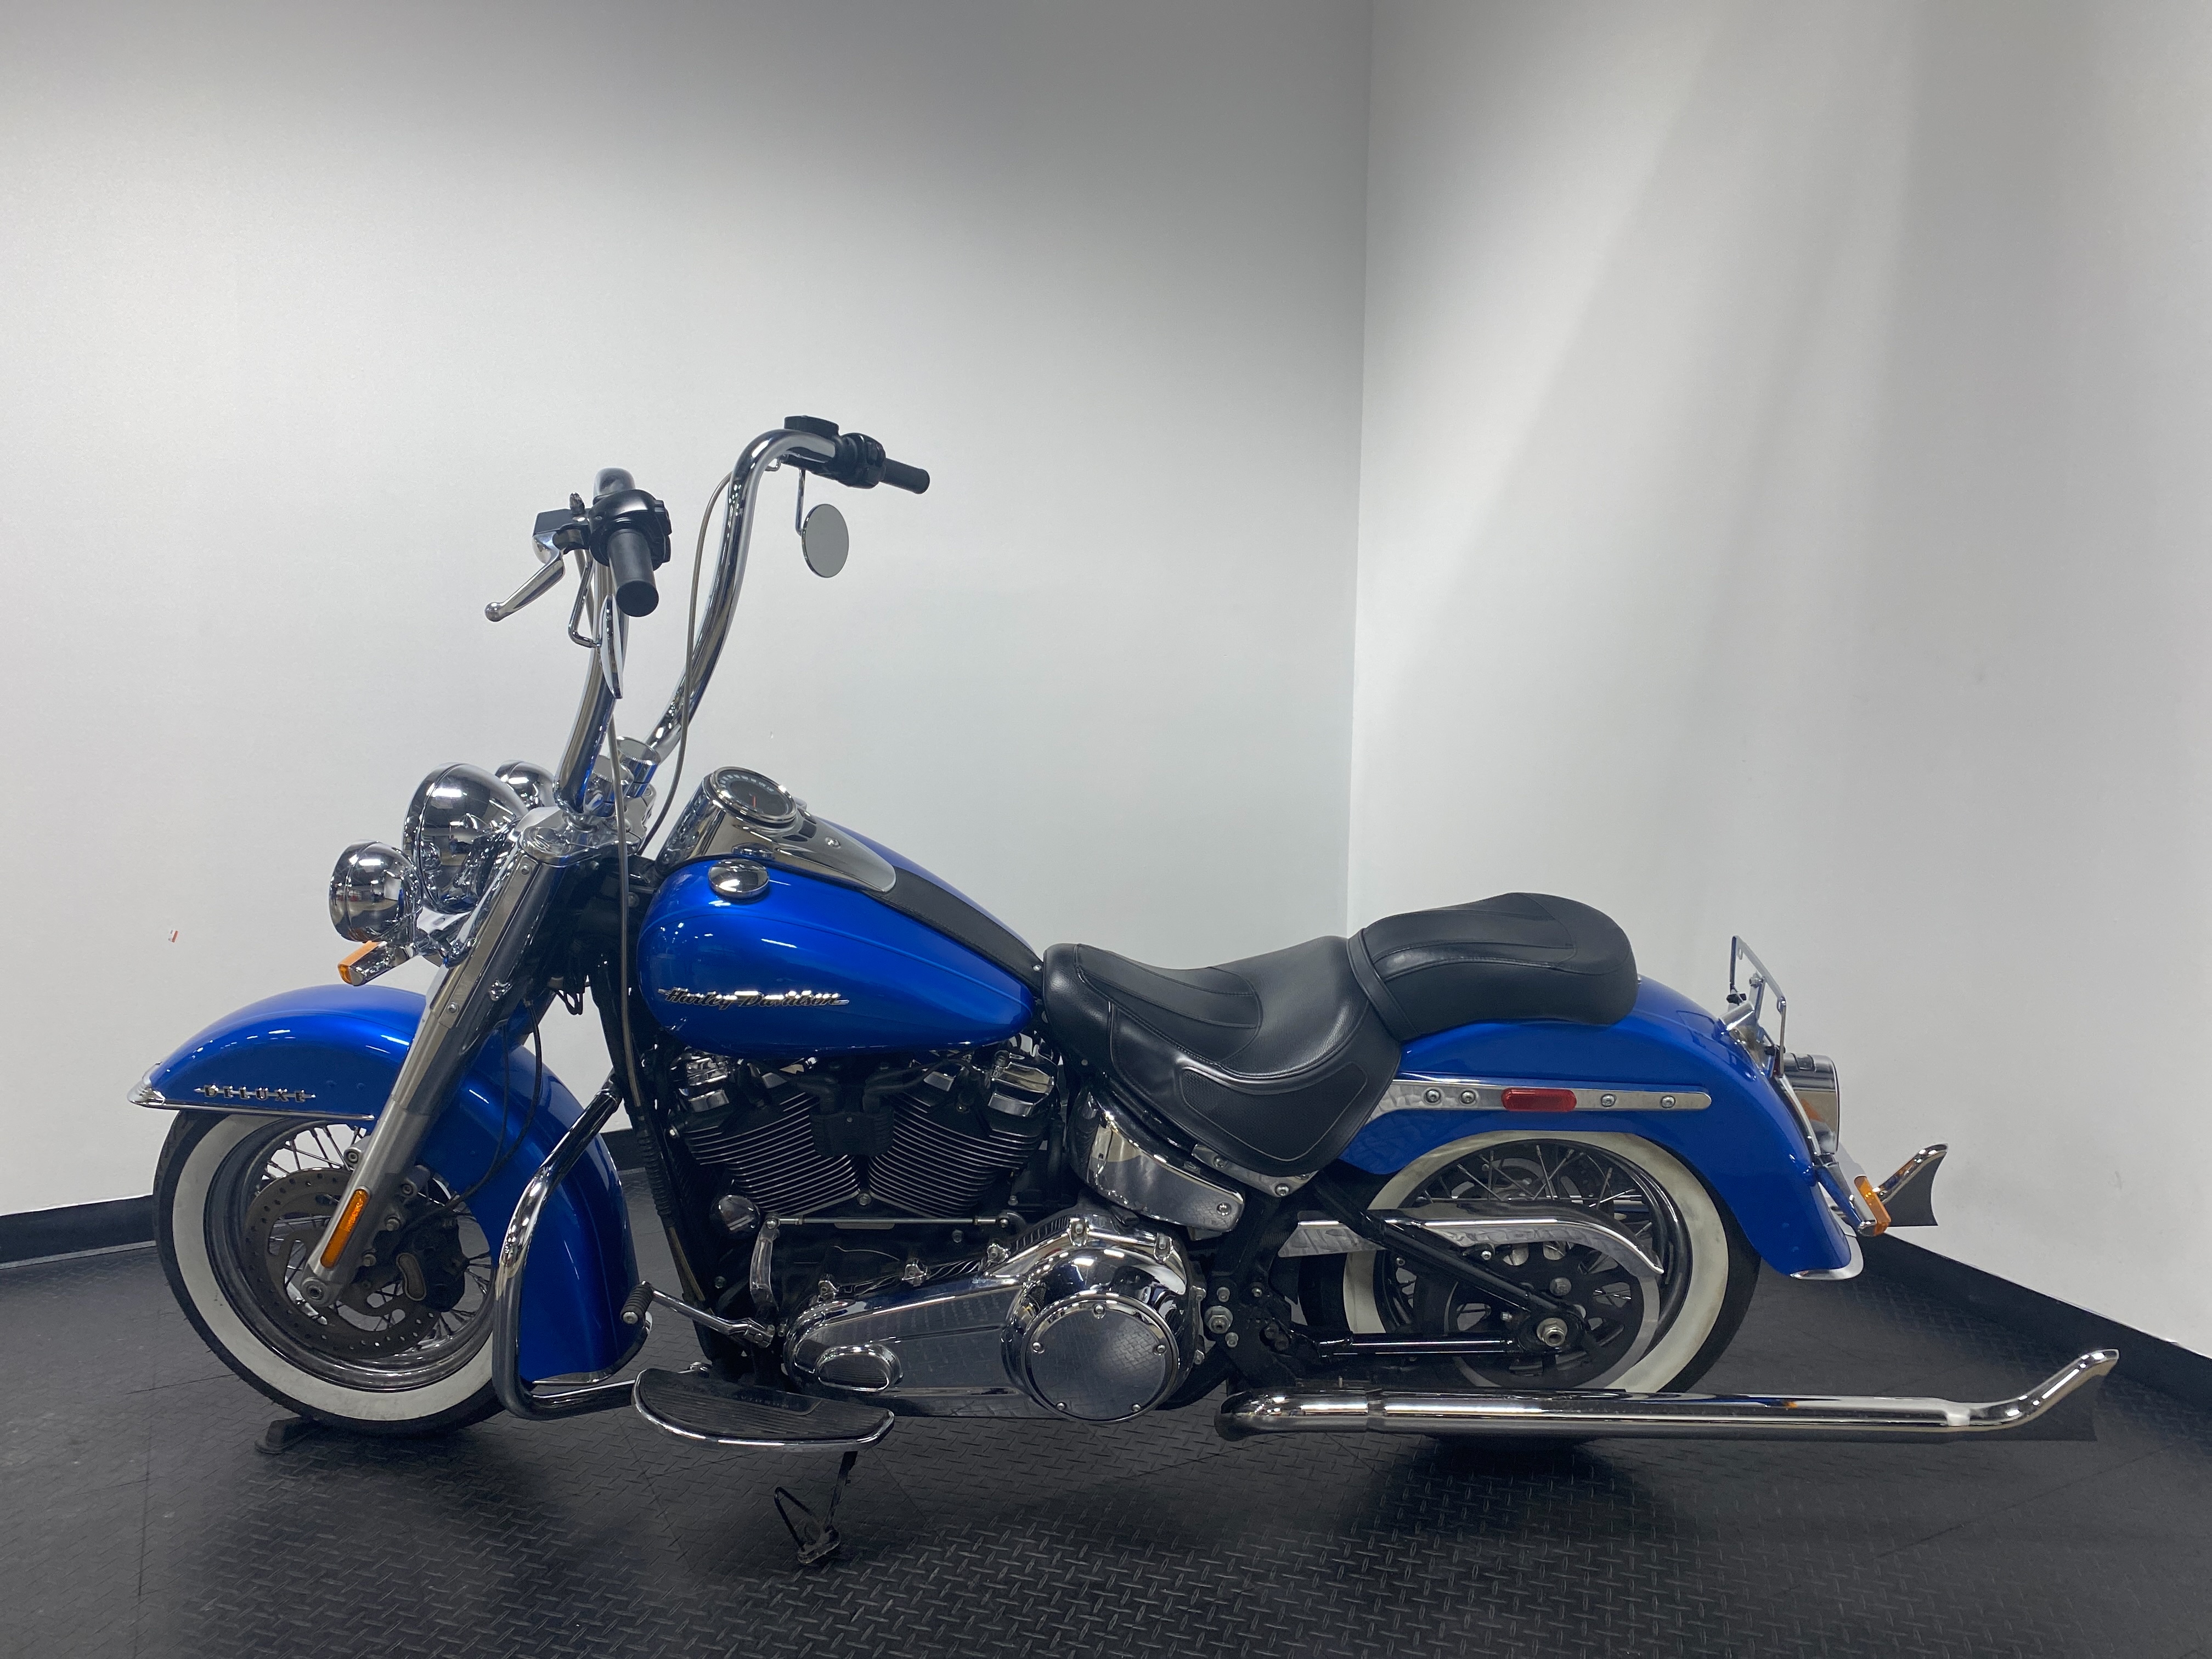 2018 Harley-Davidson Softail Deluxe at Cannonball Harley-Davidson